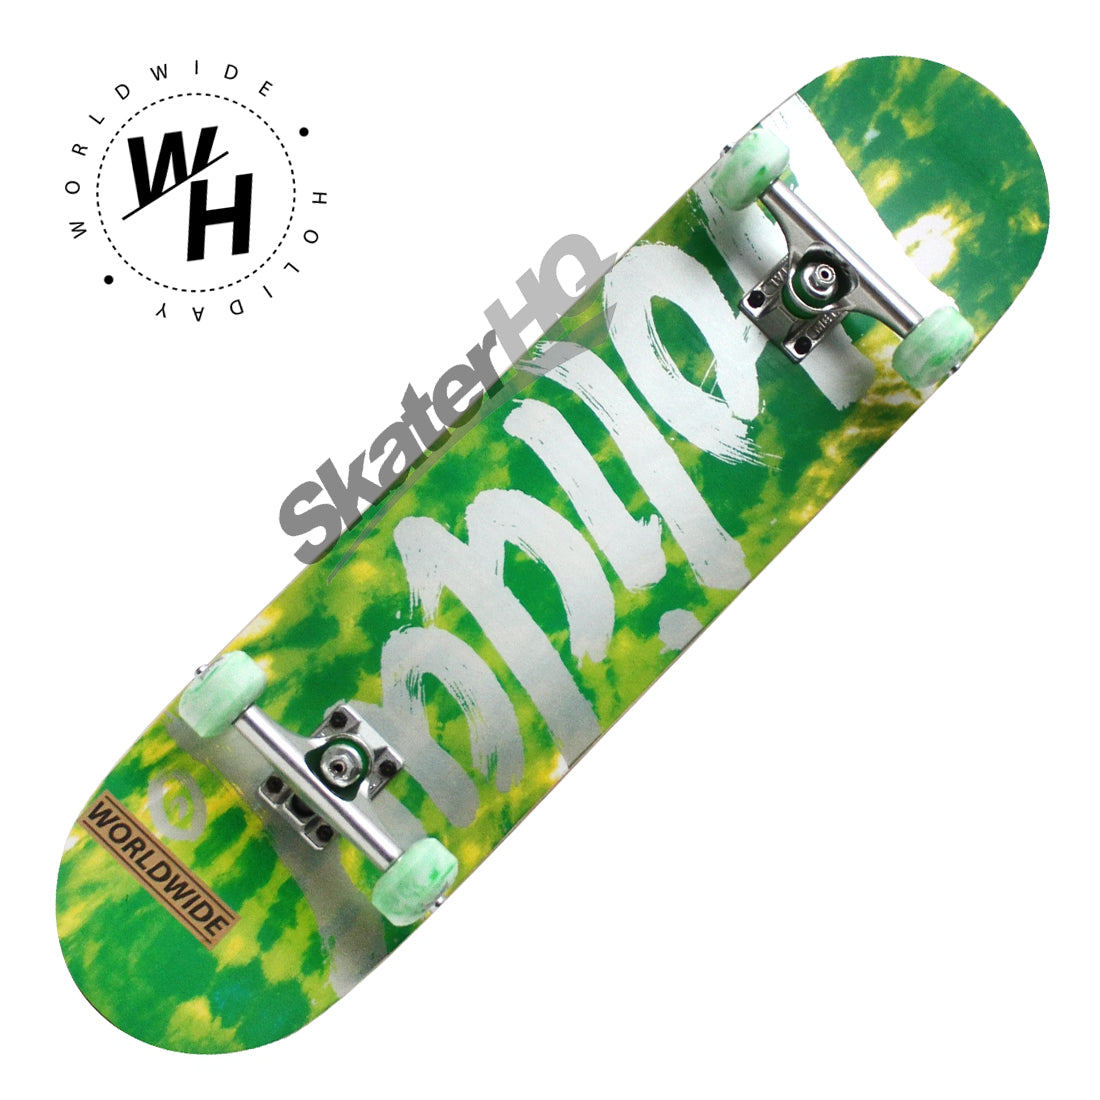 Holiday Tie Dye 8.0 Complete - Green/Silver Skateboard Completes Modern Street